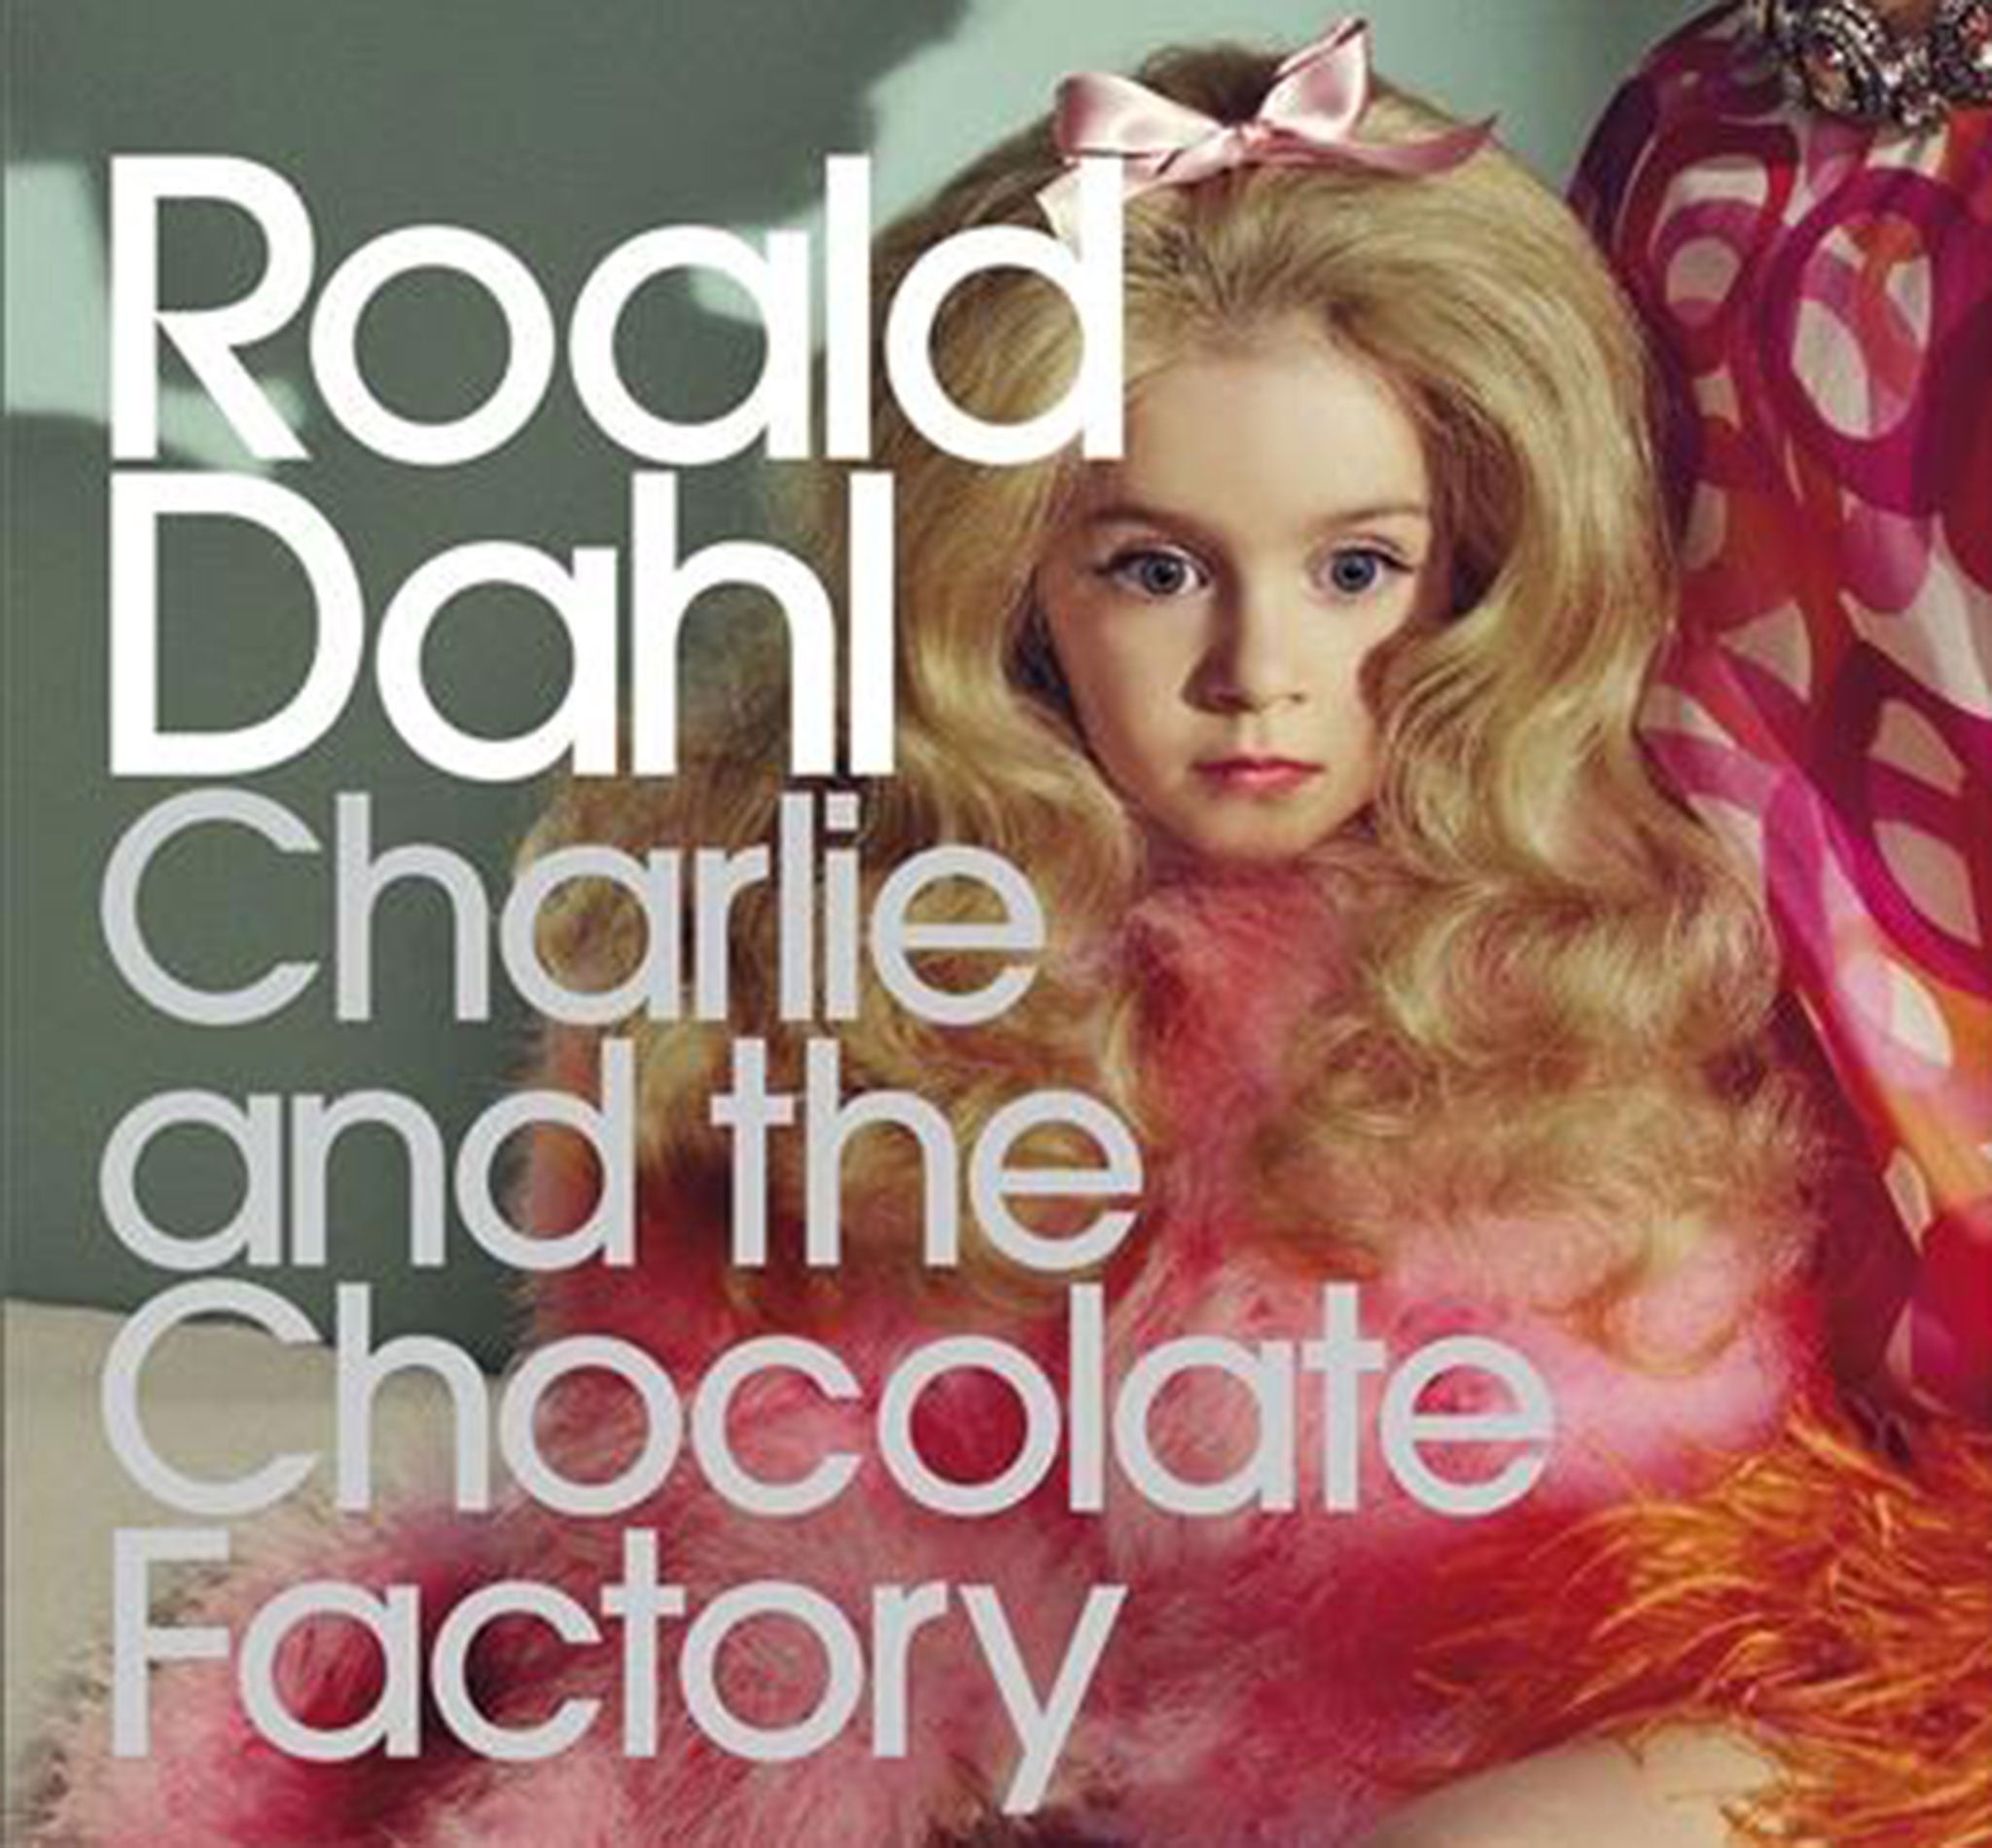 This new book cover for Roald Dahl's Charlie and the Chocolate Factory has sparked outrage